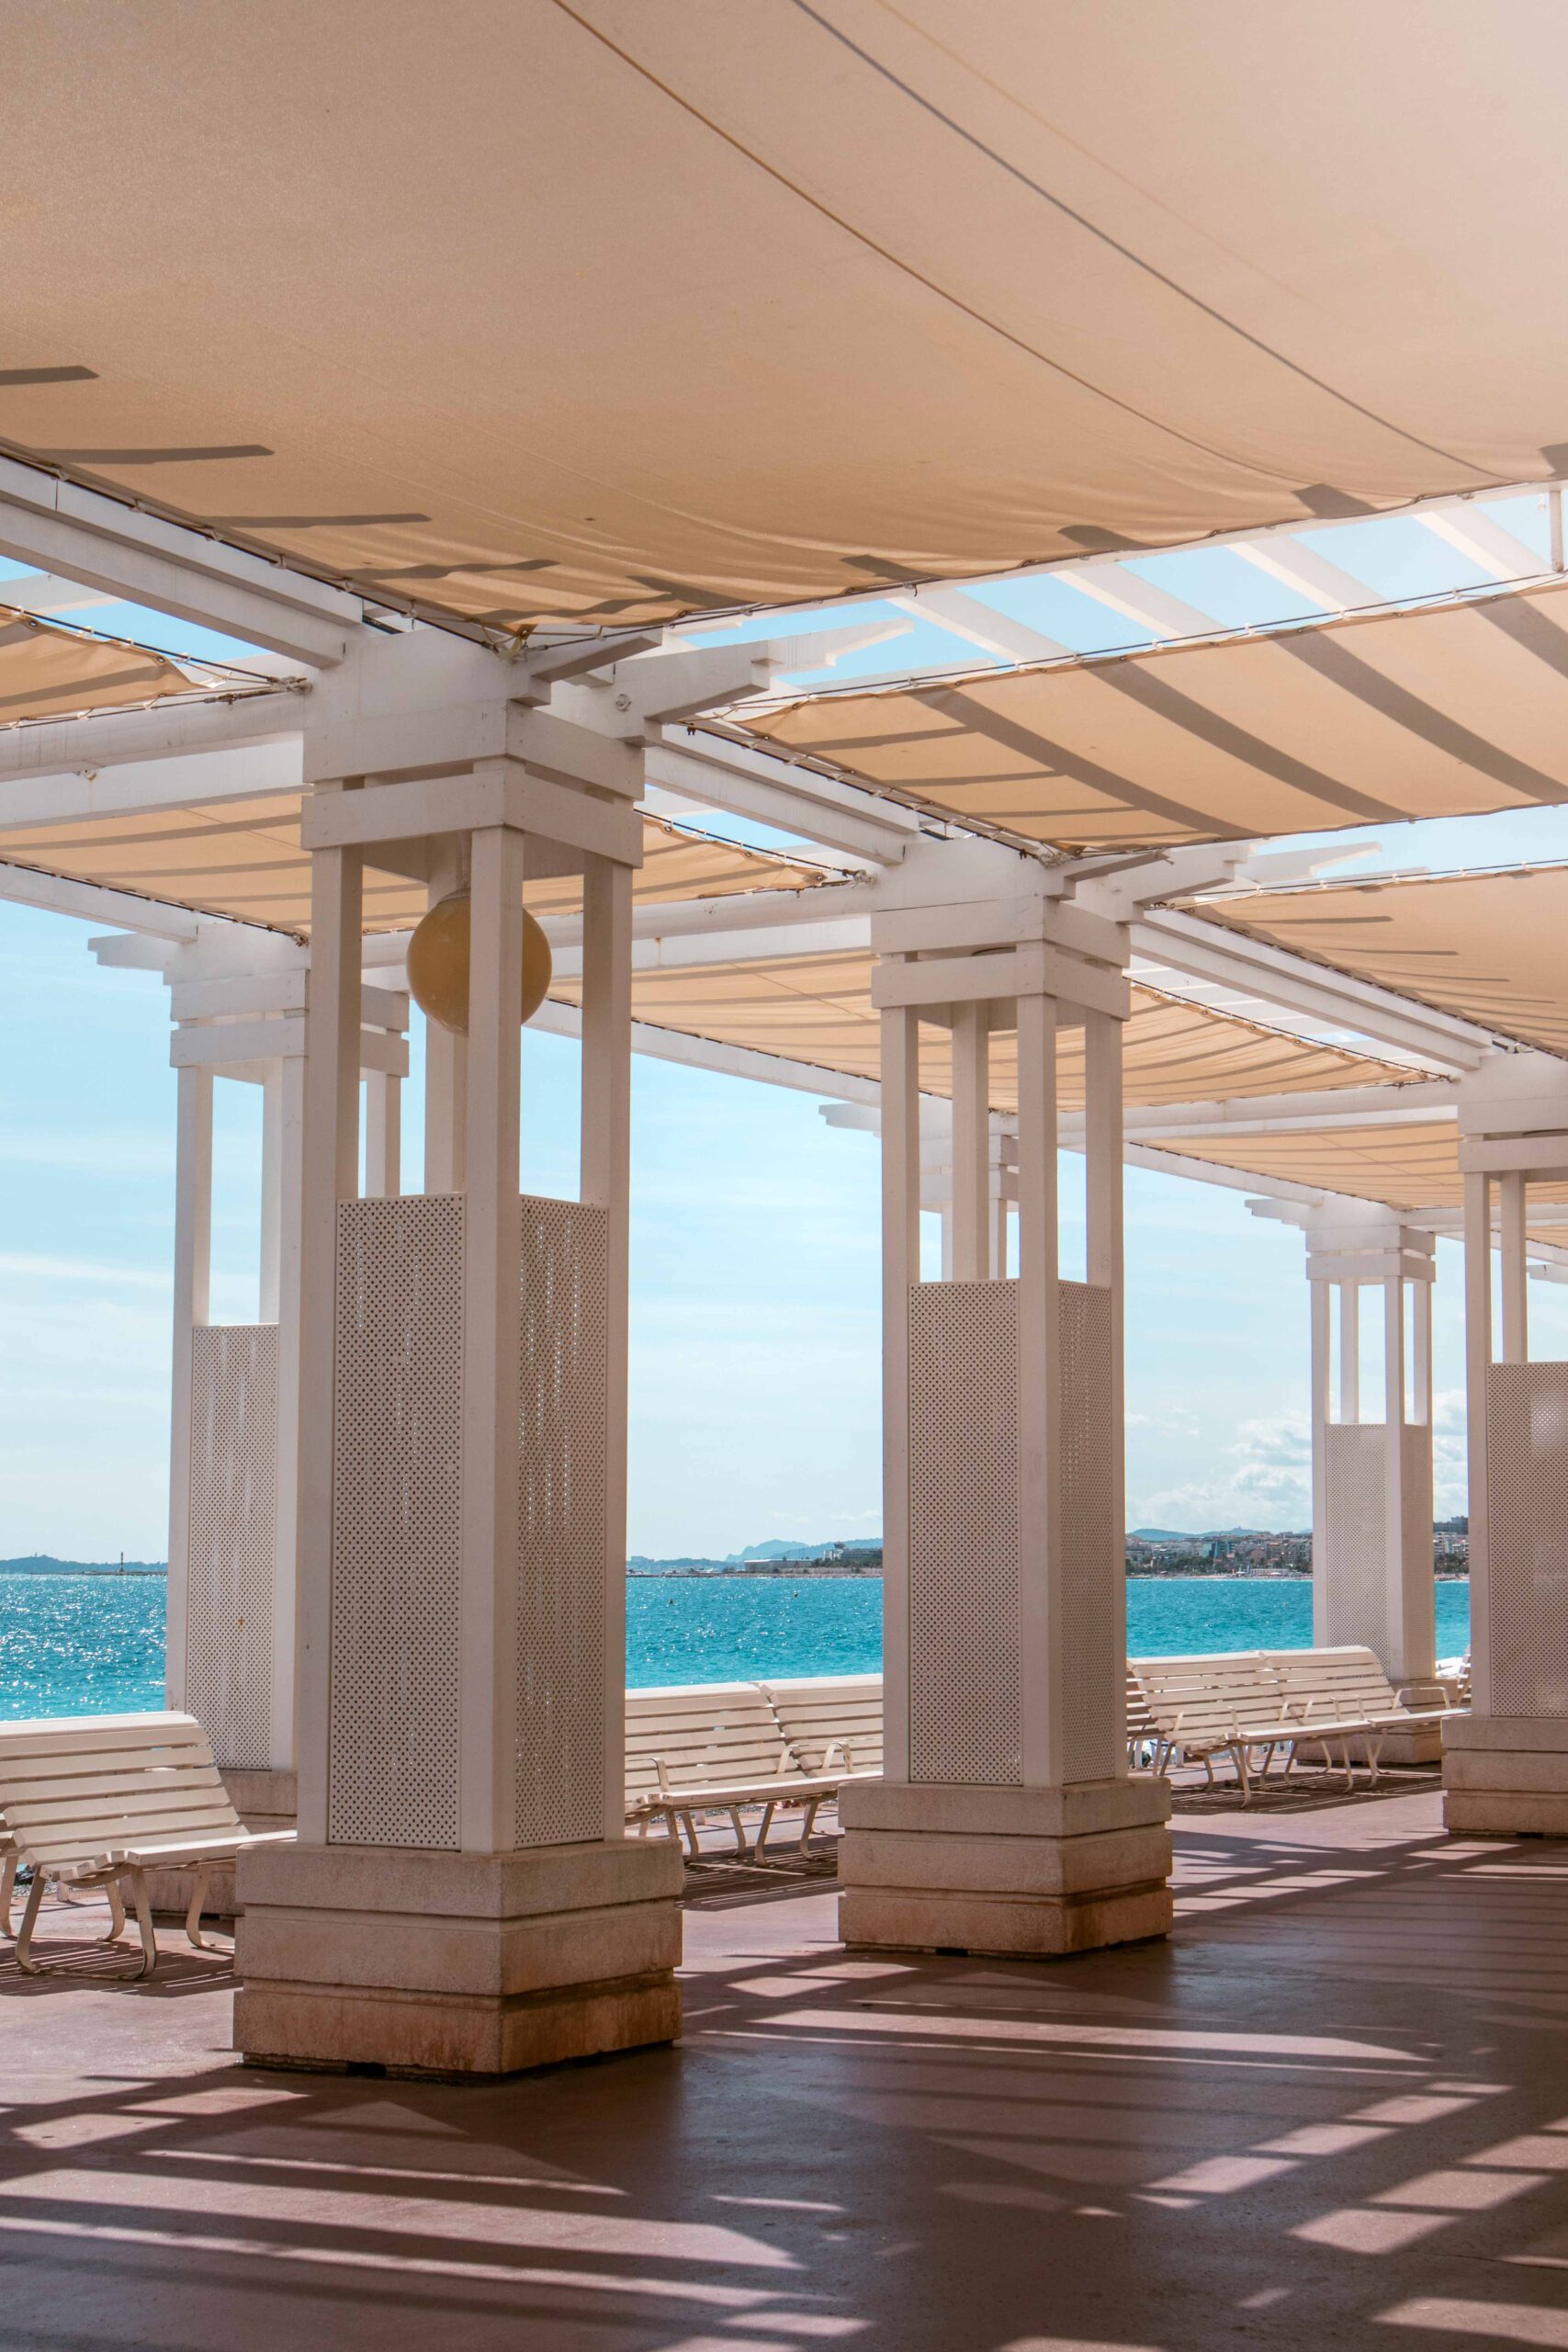 White pergola and benches next to the sea on the Promenade des Anglais in Nice, France